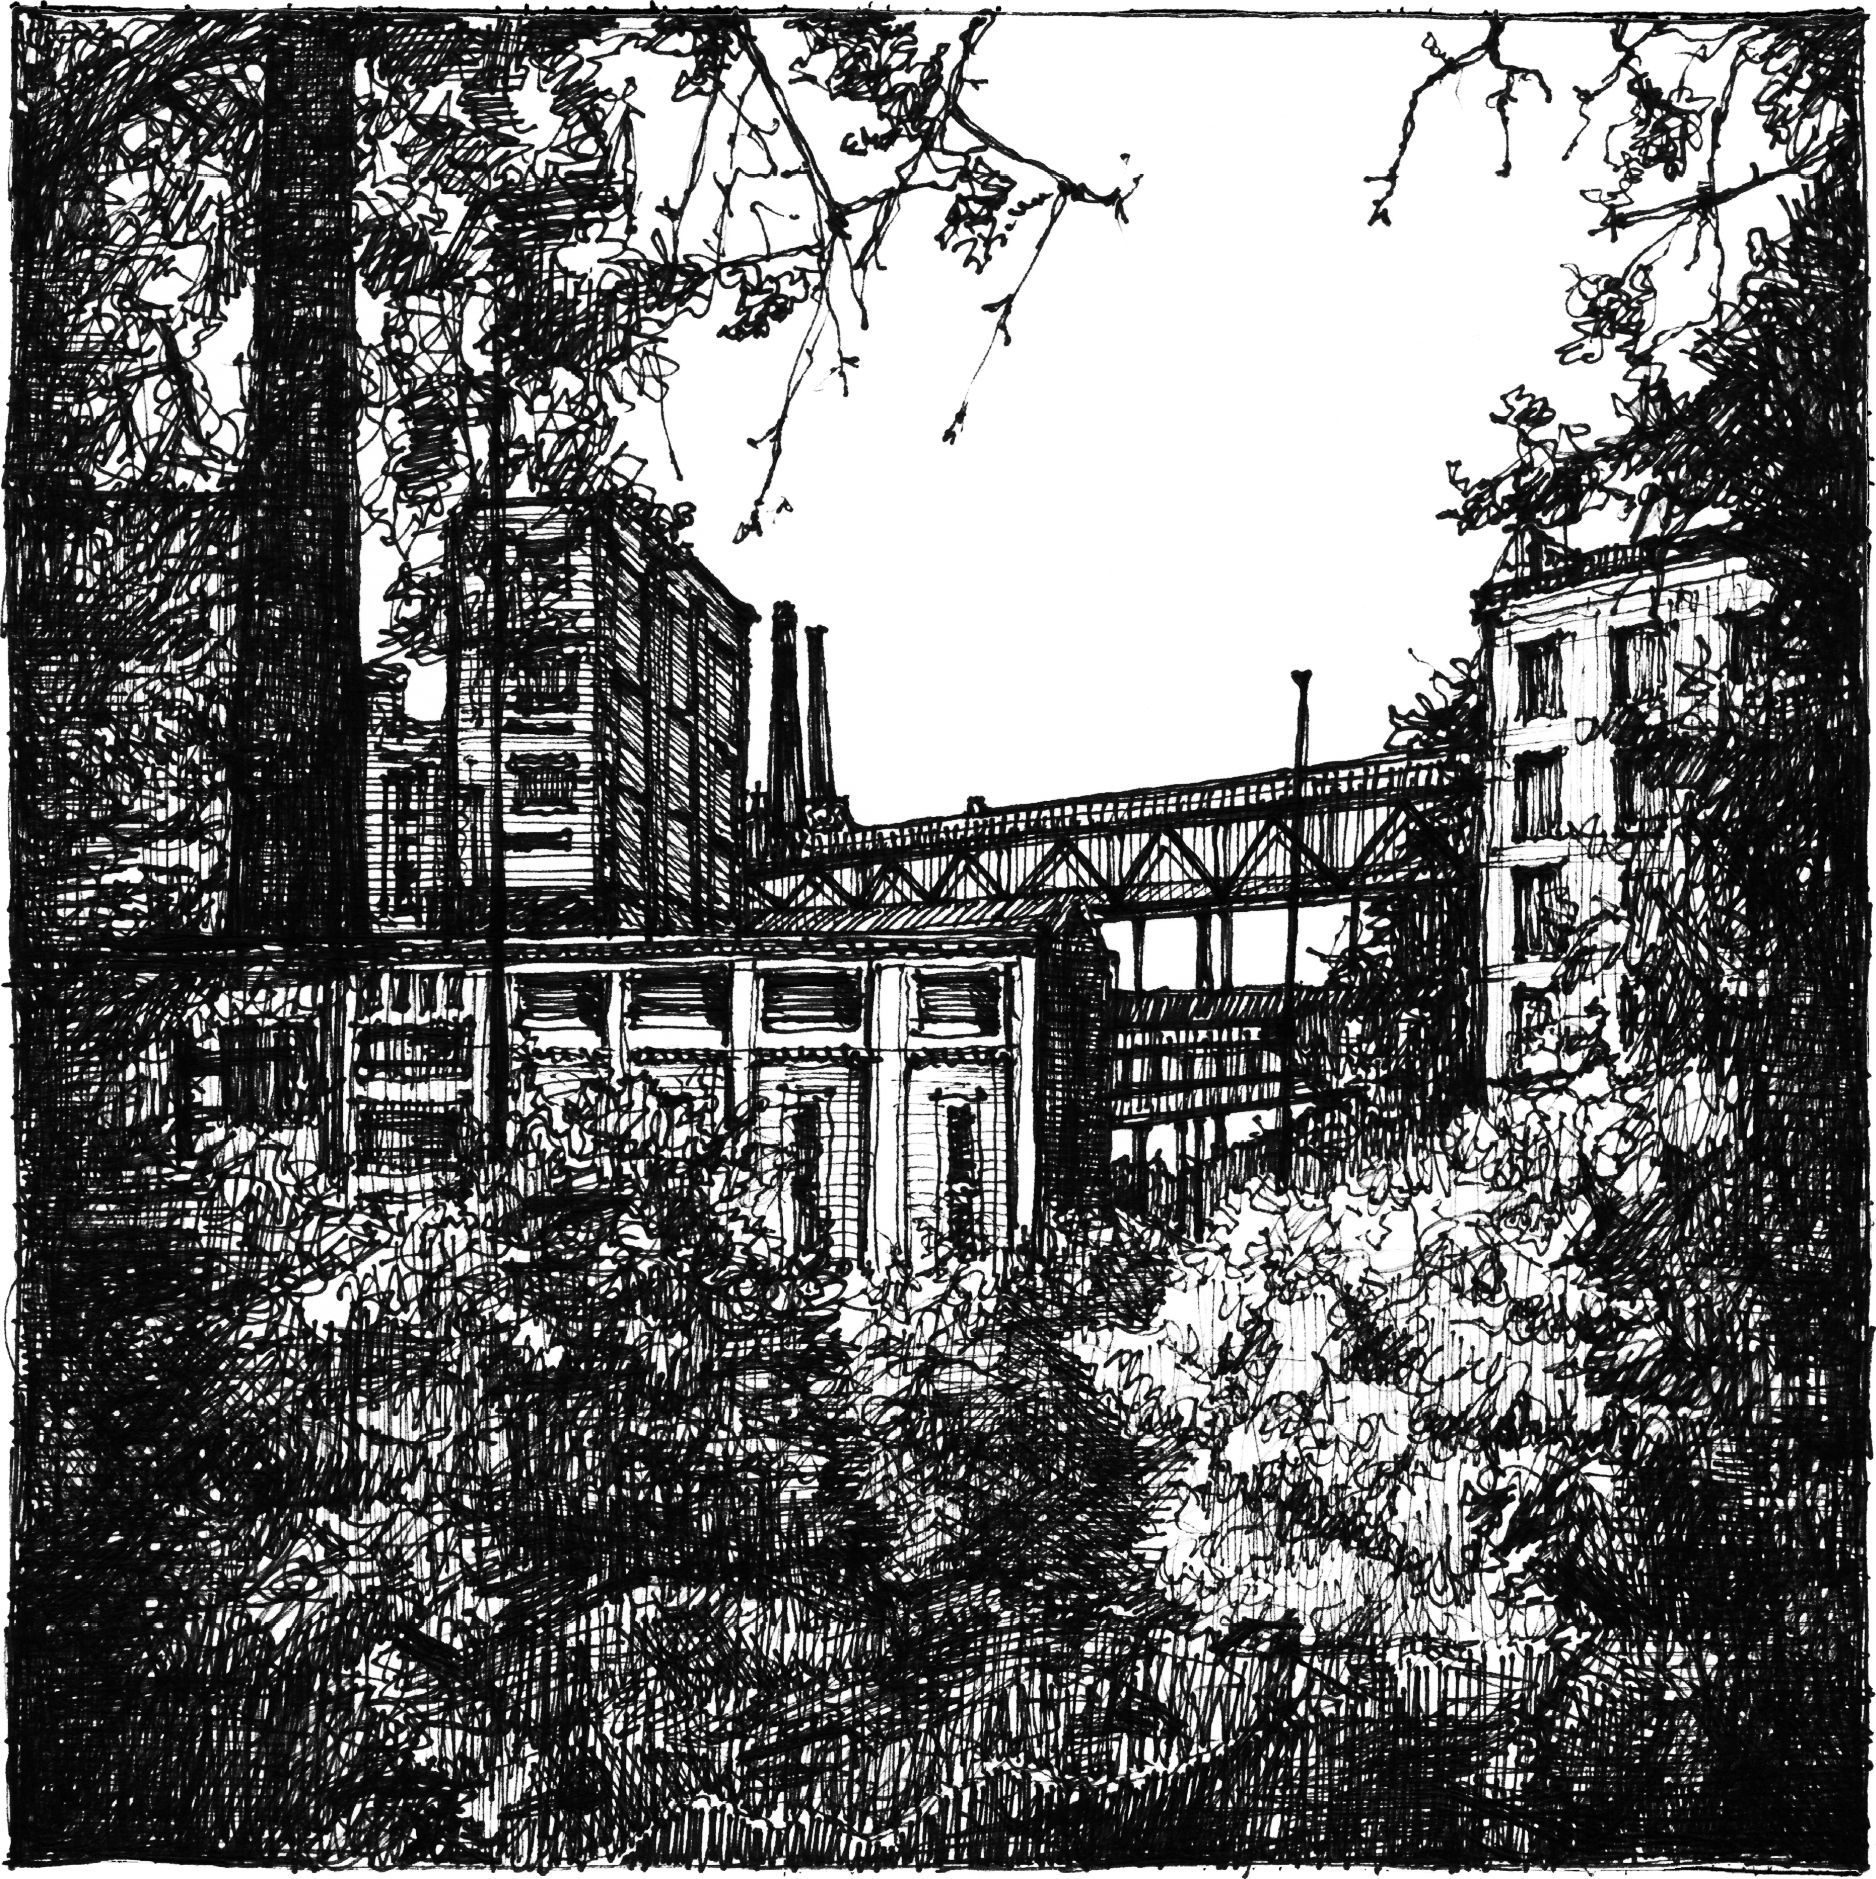 Shale Factory - Drawing by Camillo Visini